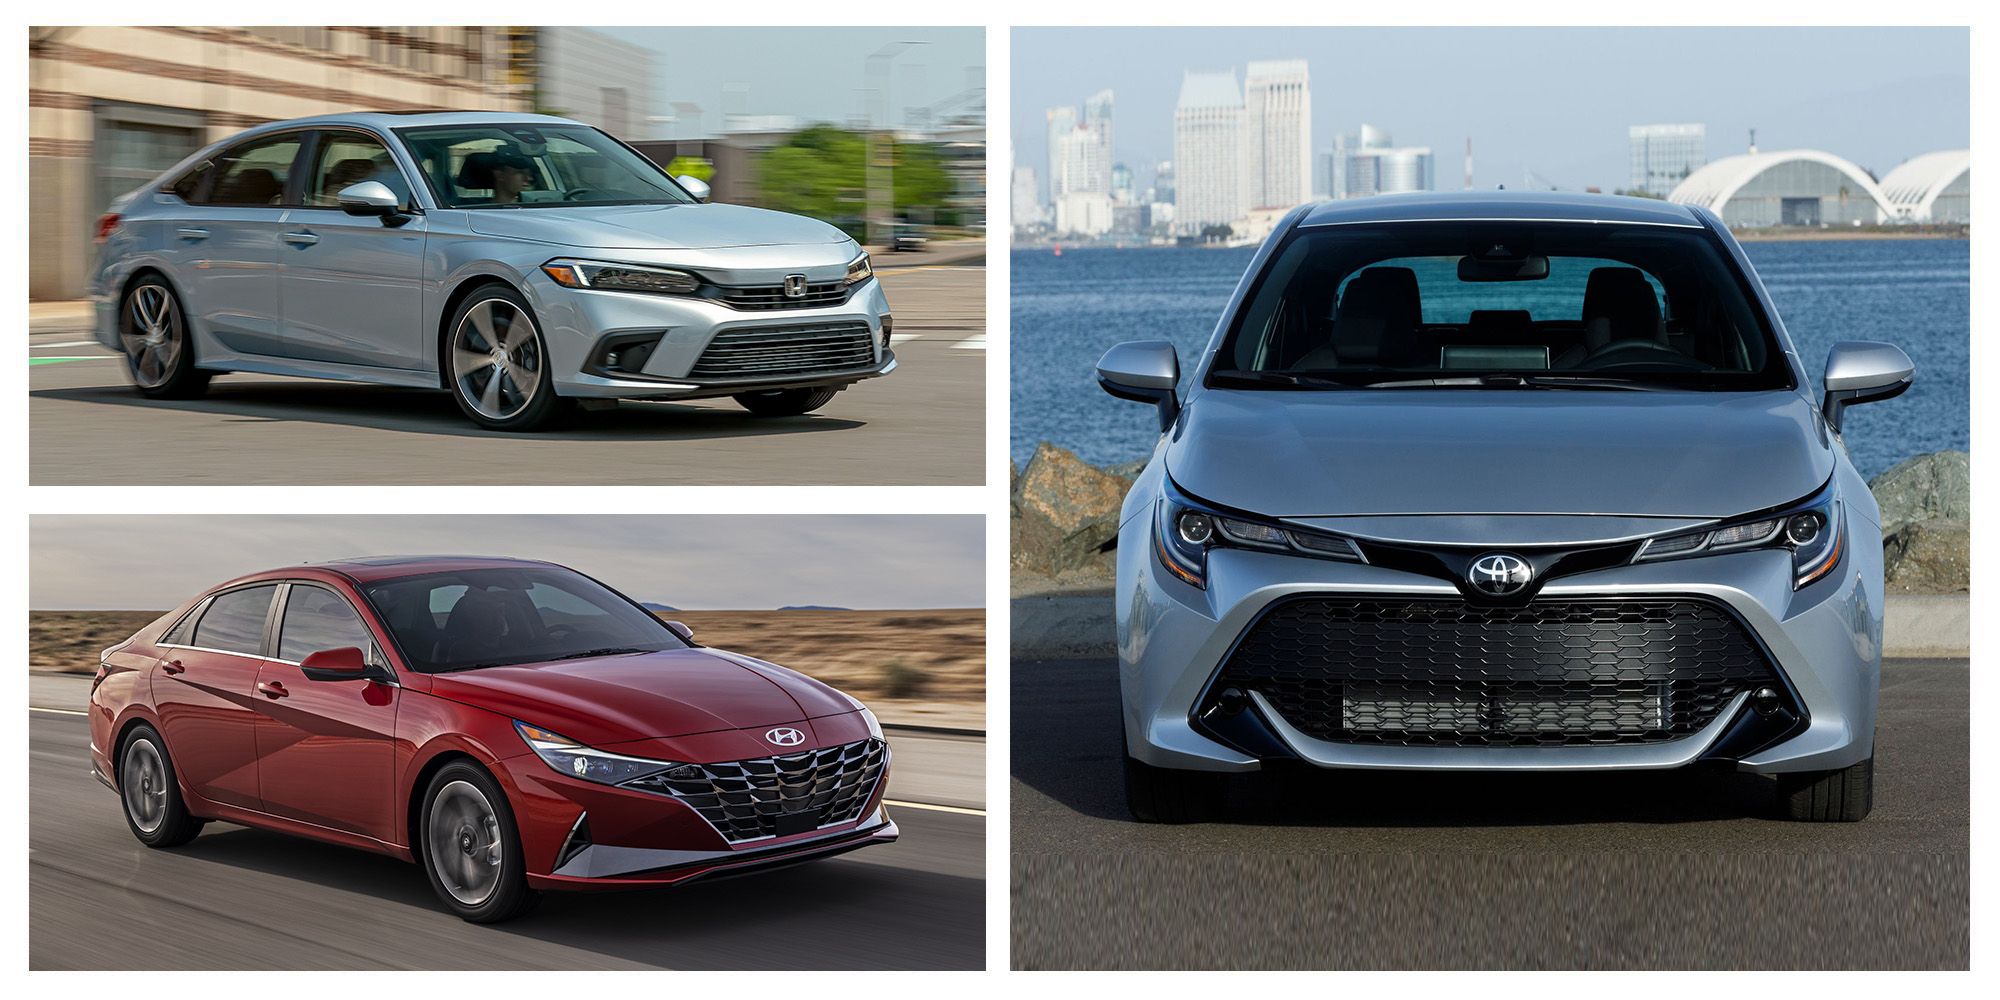 Eco-Friendly Advances: Discover the Top 8 Cars Redefining Fuel Efficiency!